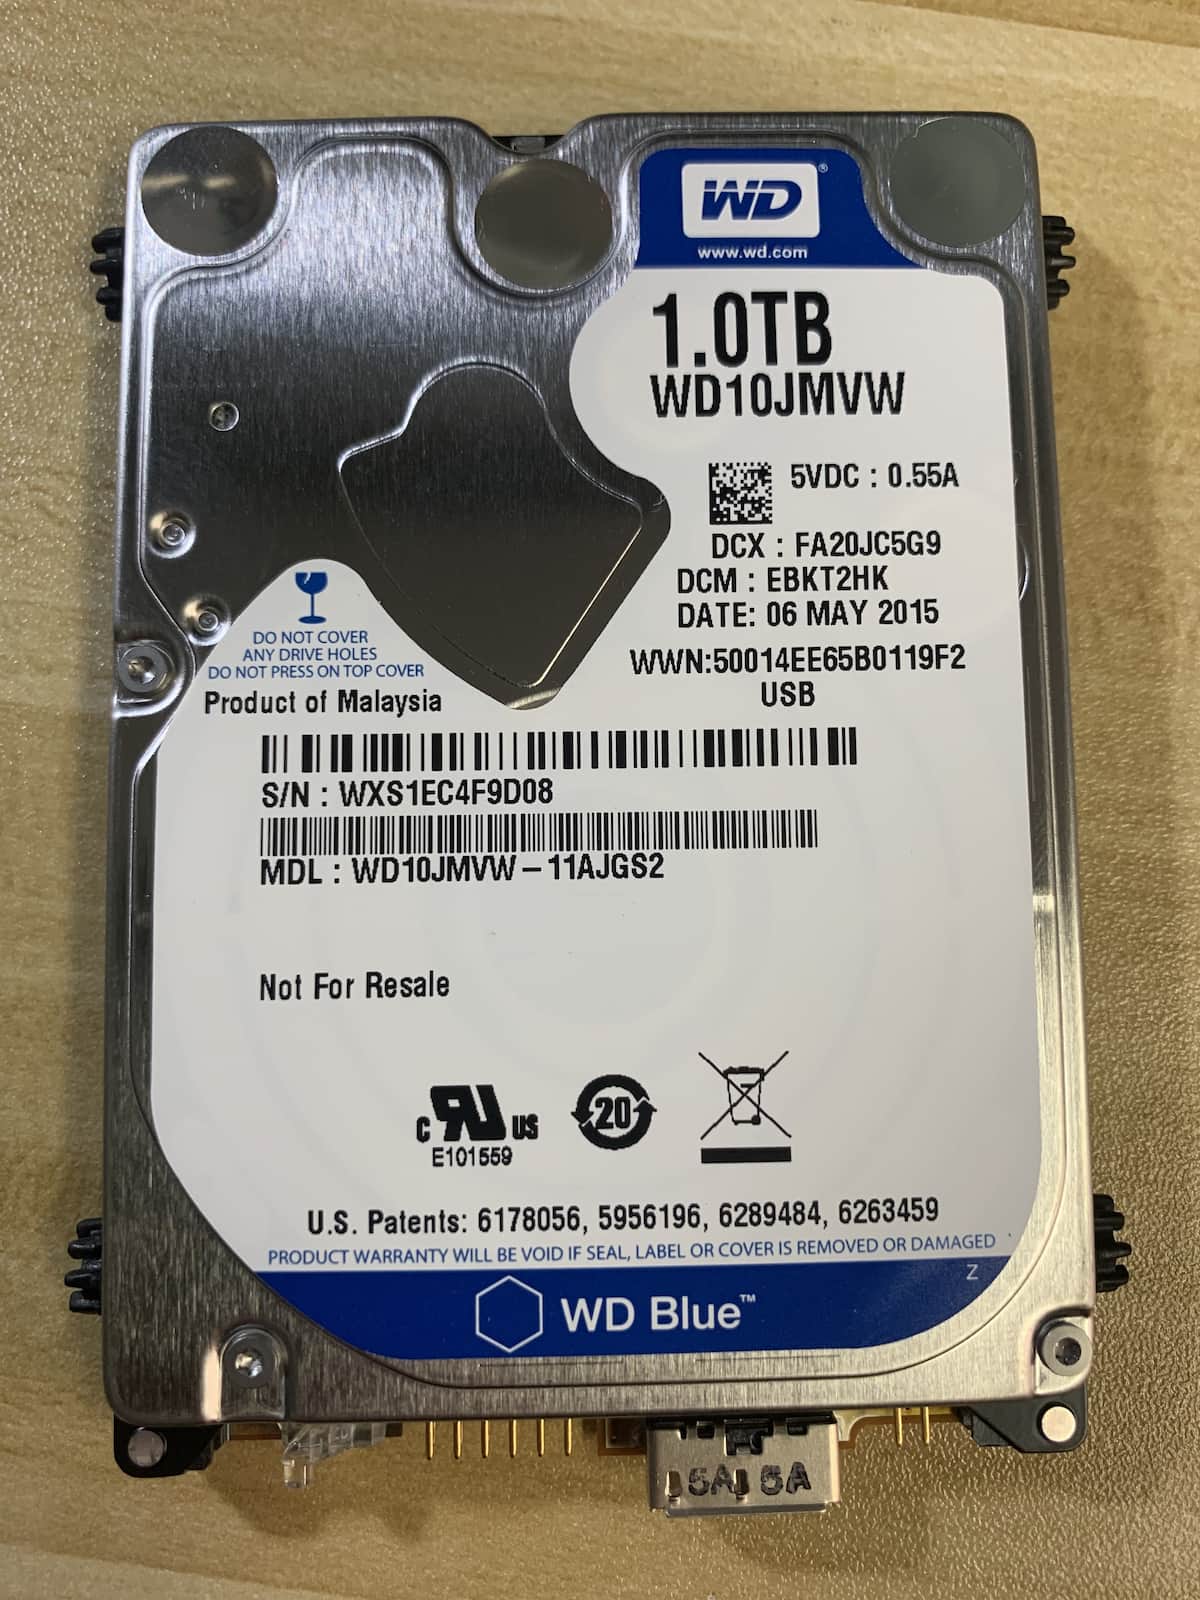 My Passport WD10JMVW – 11AJGS2 Dropped Data Recovery